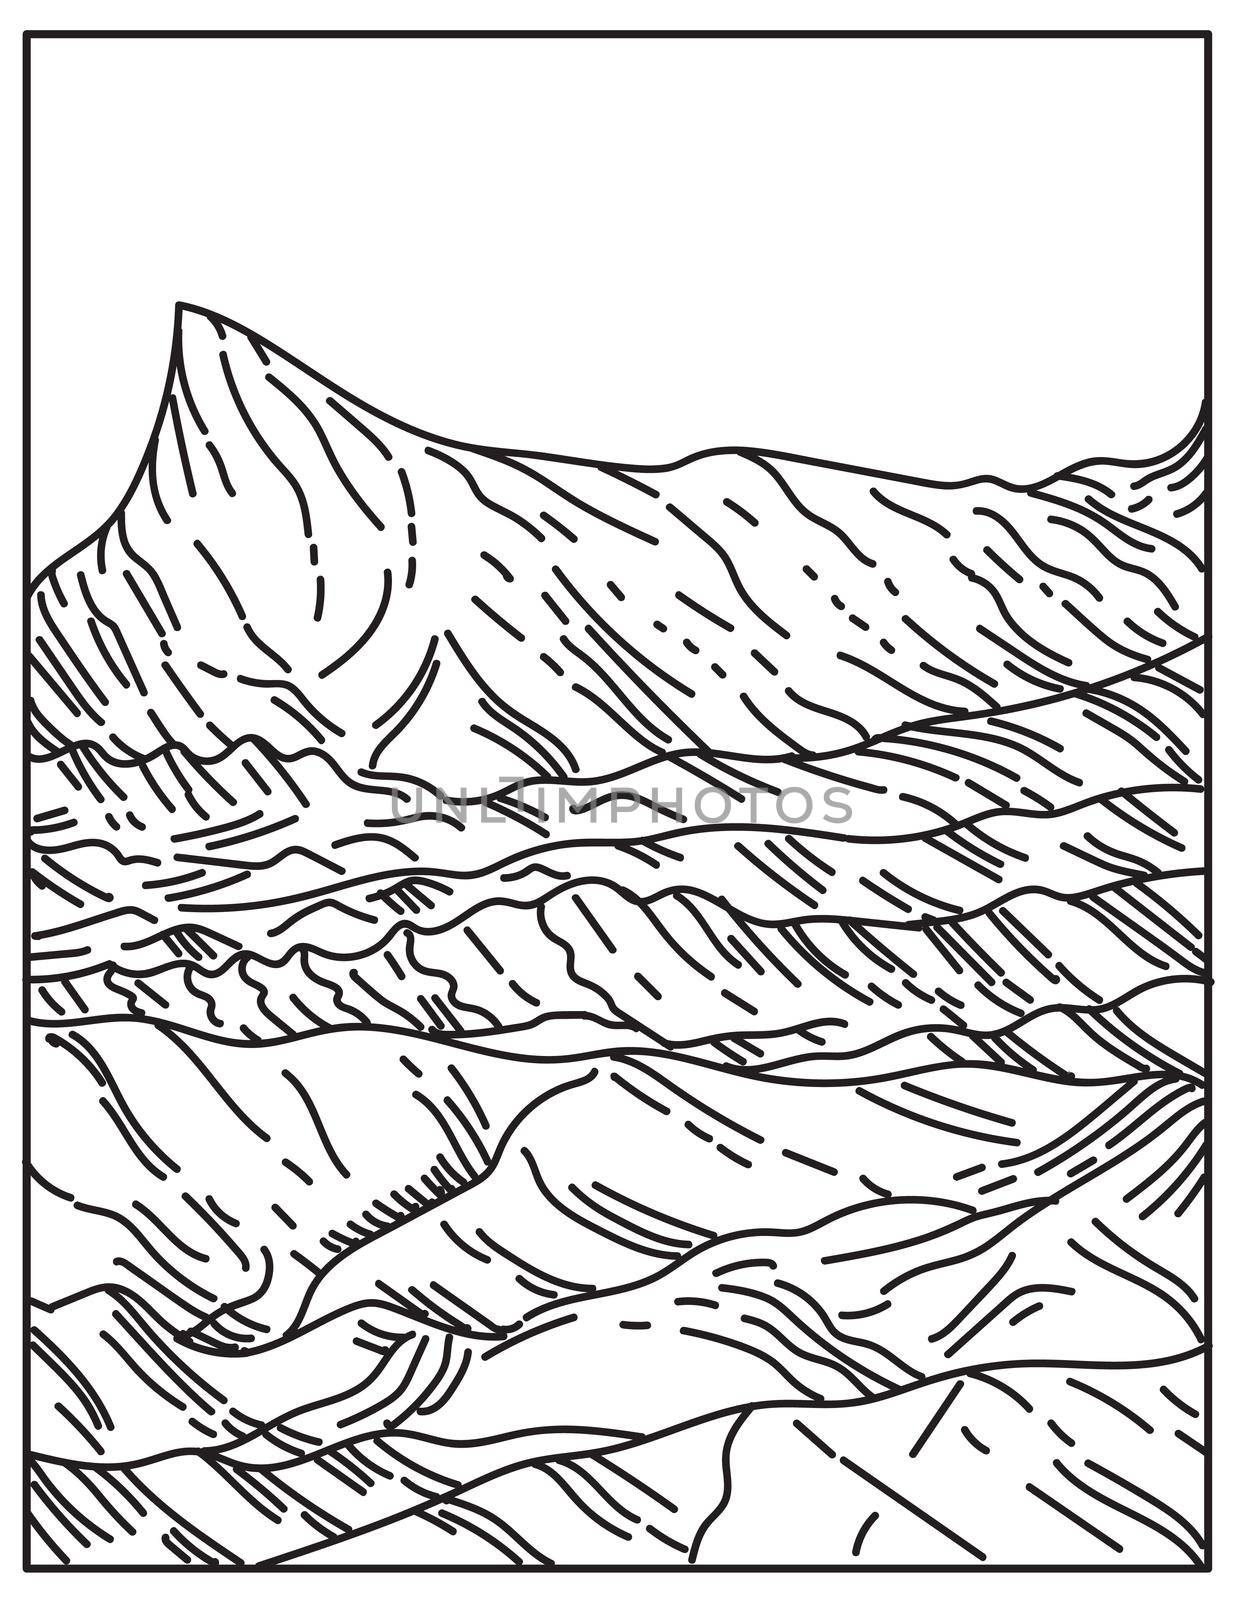 Mono line illustration of Death Valley National Park that straddles the California Nevada border, east of the Sierra Nevada, United States done in retro black and white monoline line art style.